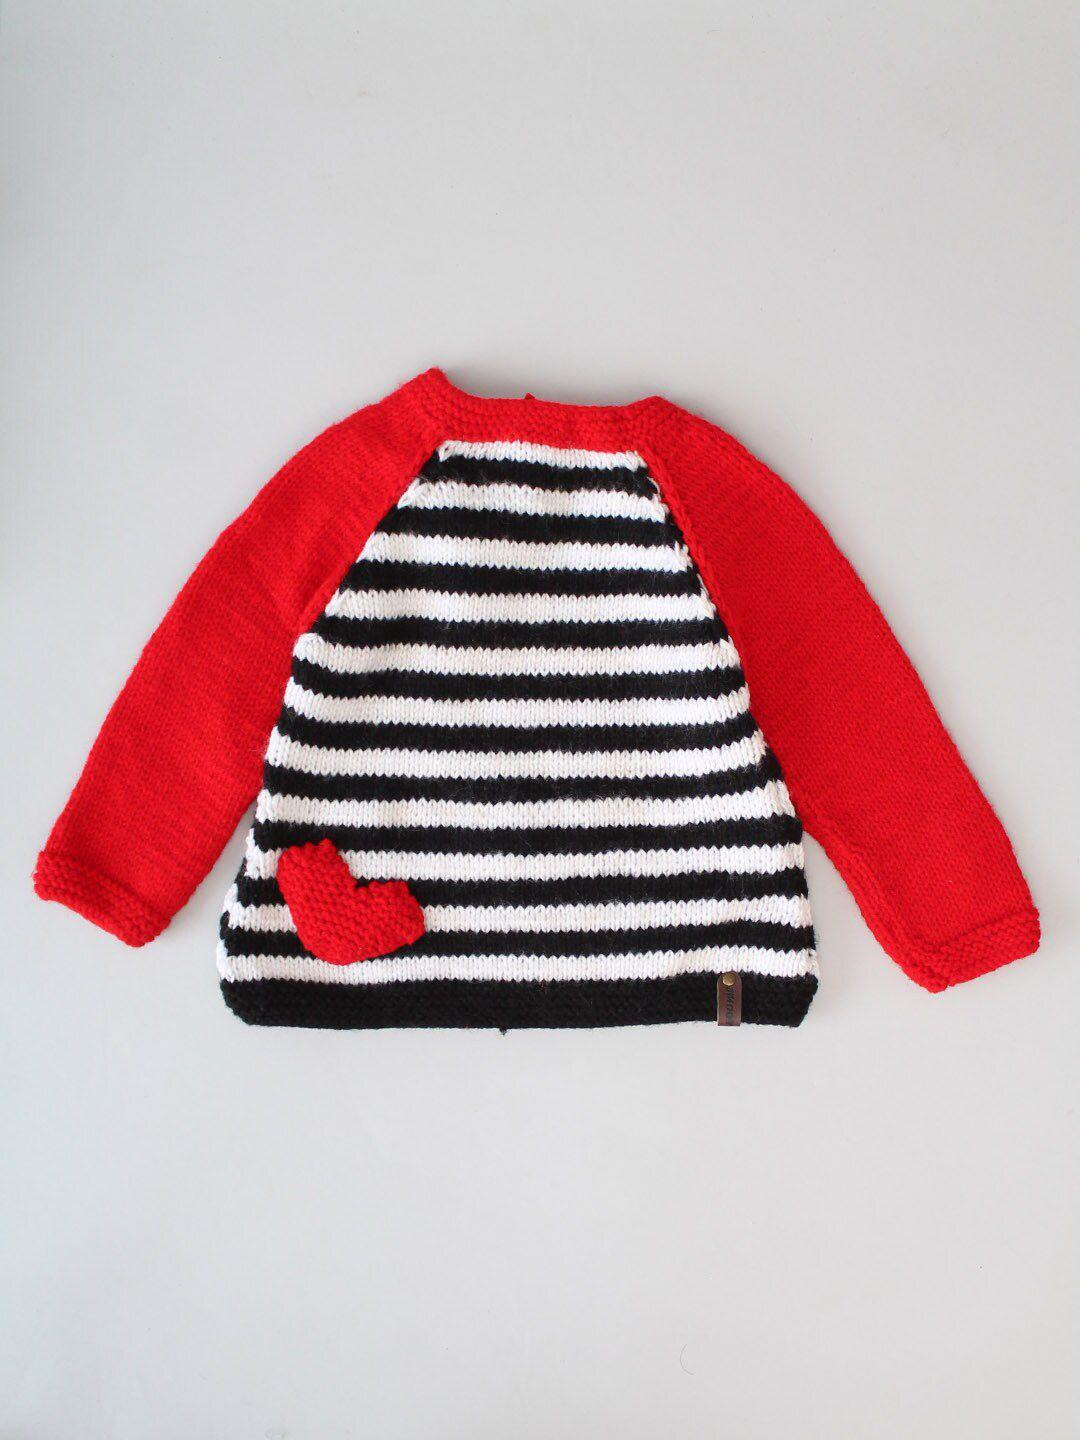 woonie-kids-striped-acrylic-pullover-with-heart-applique-detail